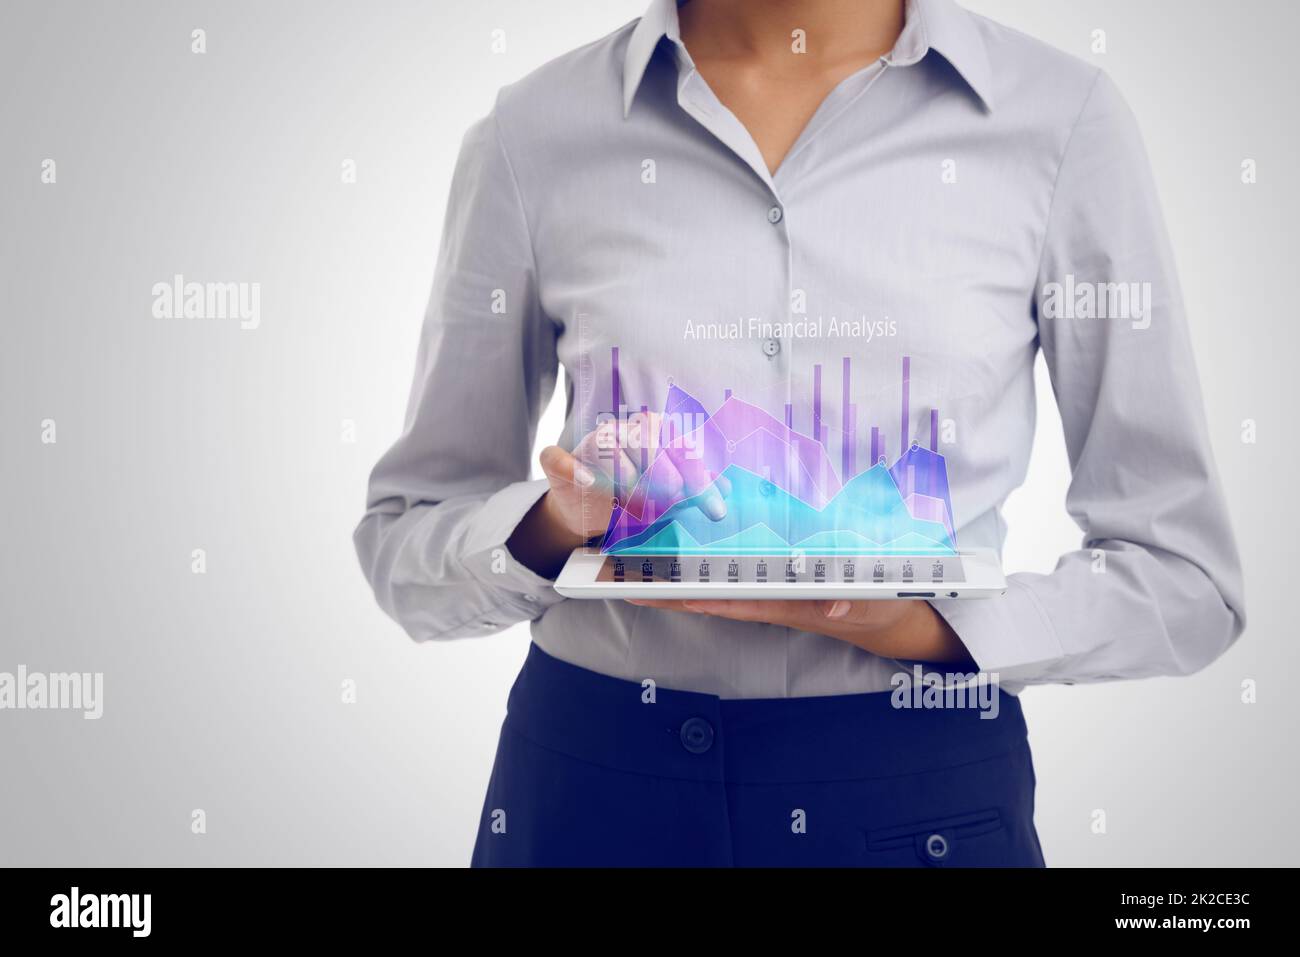 Analyzing the numbers. Cropped shot of a businesswoman using a digital tablet to analyze financial data. Stock Photo